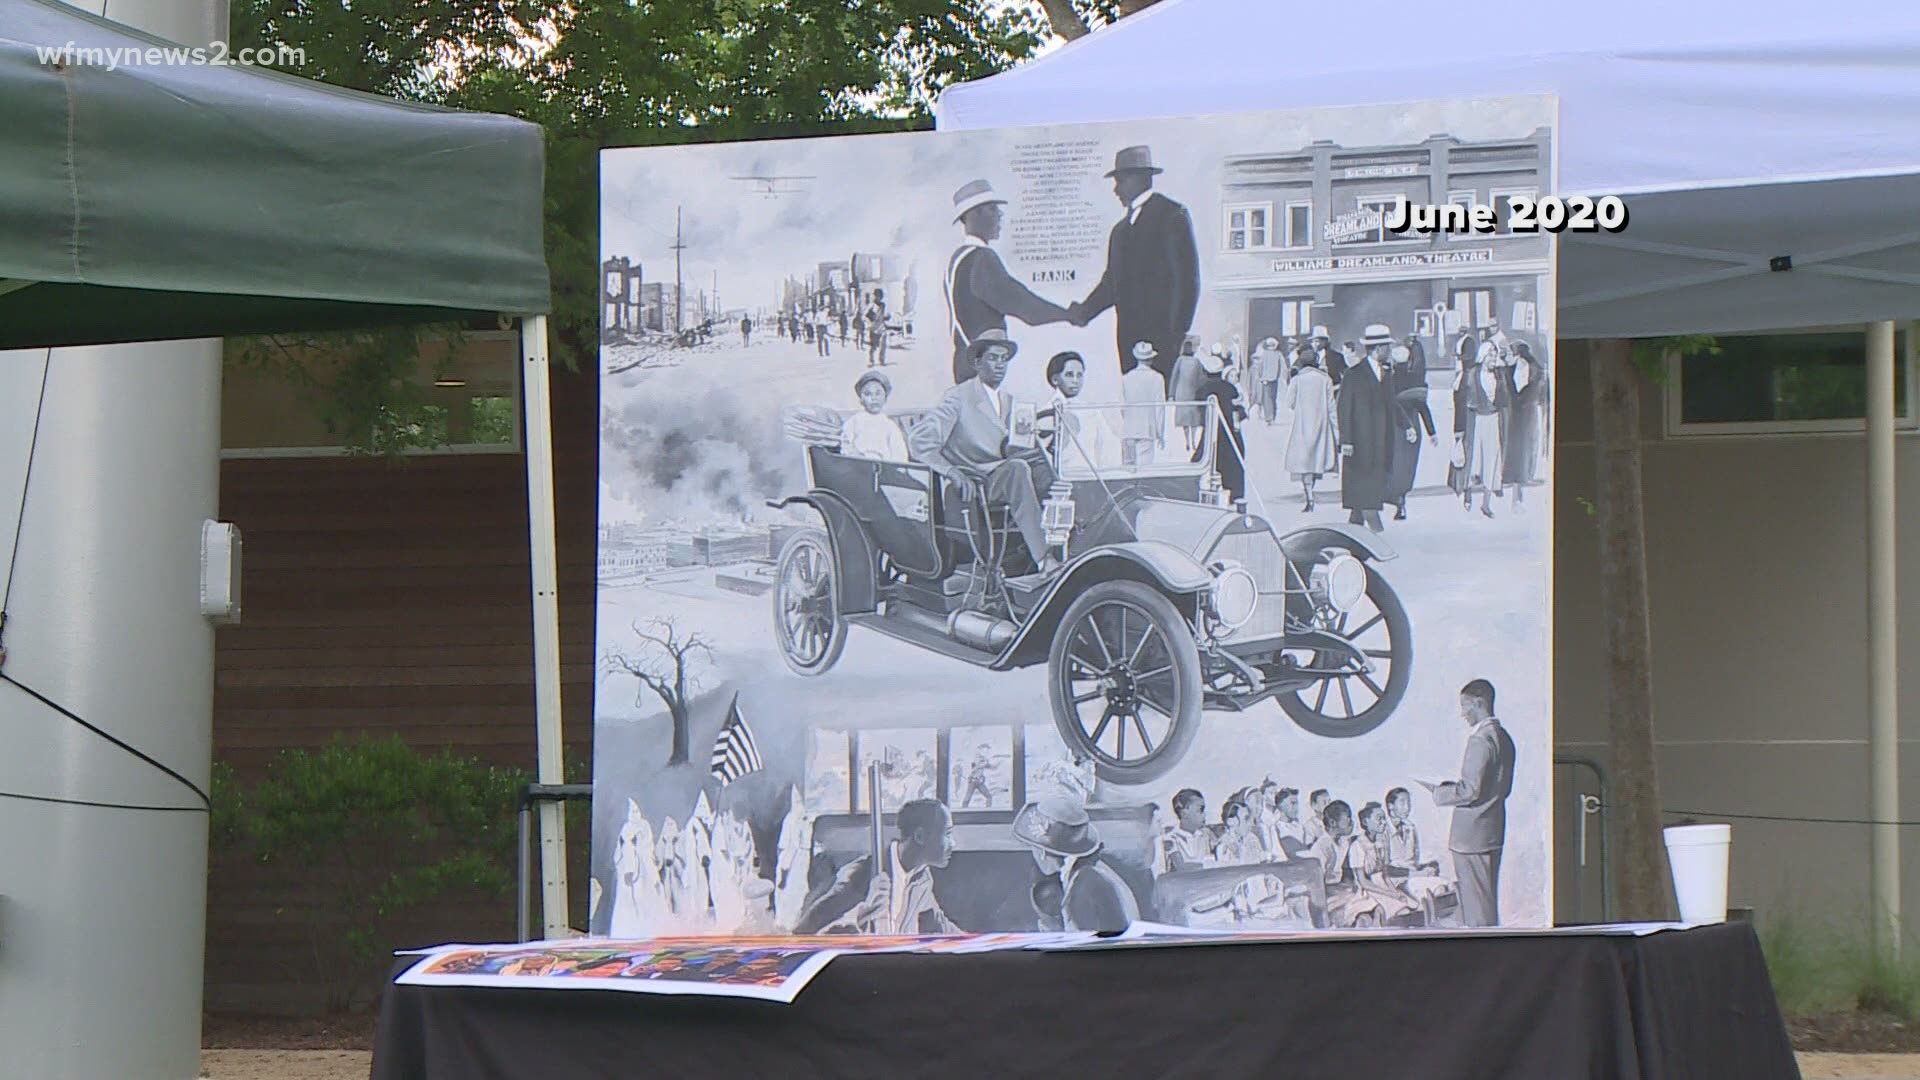 This is the second year Greensboro recognizes Juneteenth as a citywide holiday.